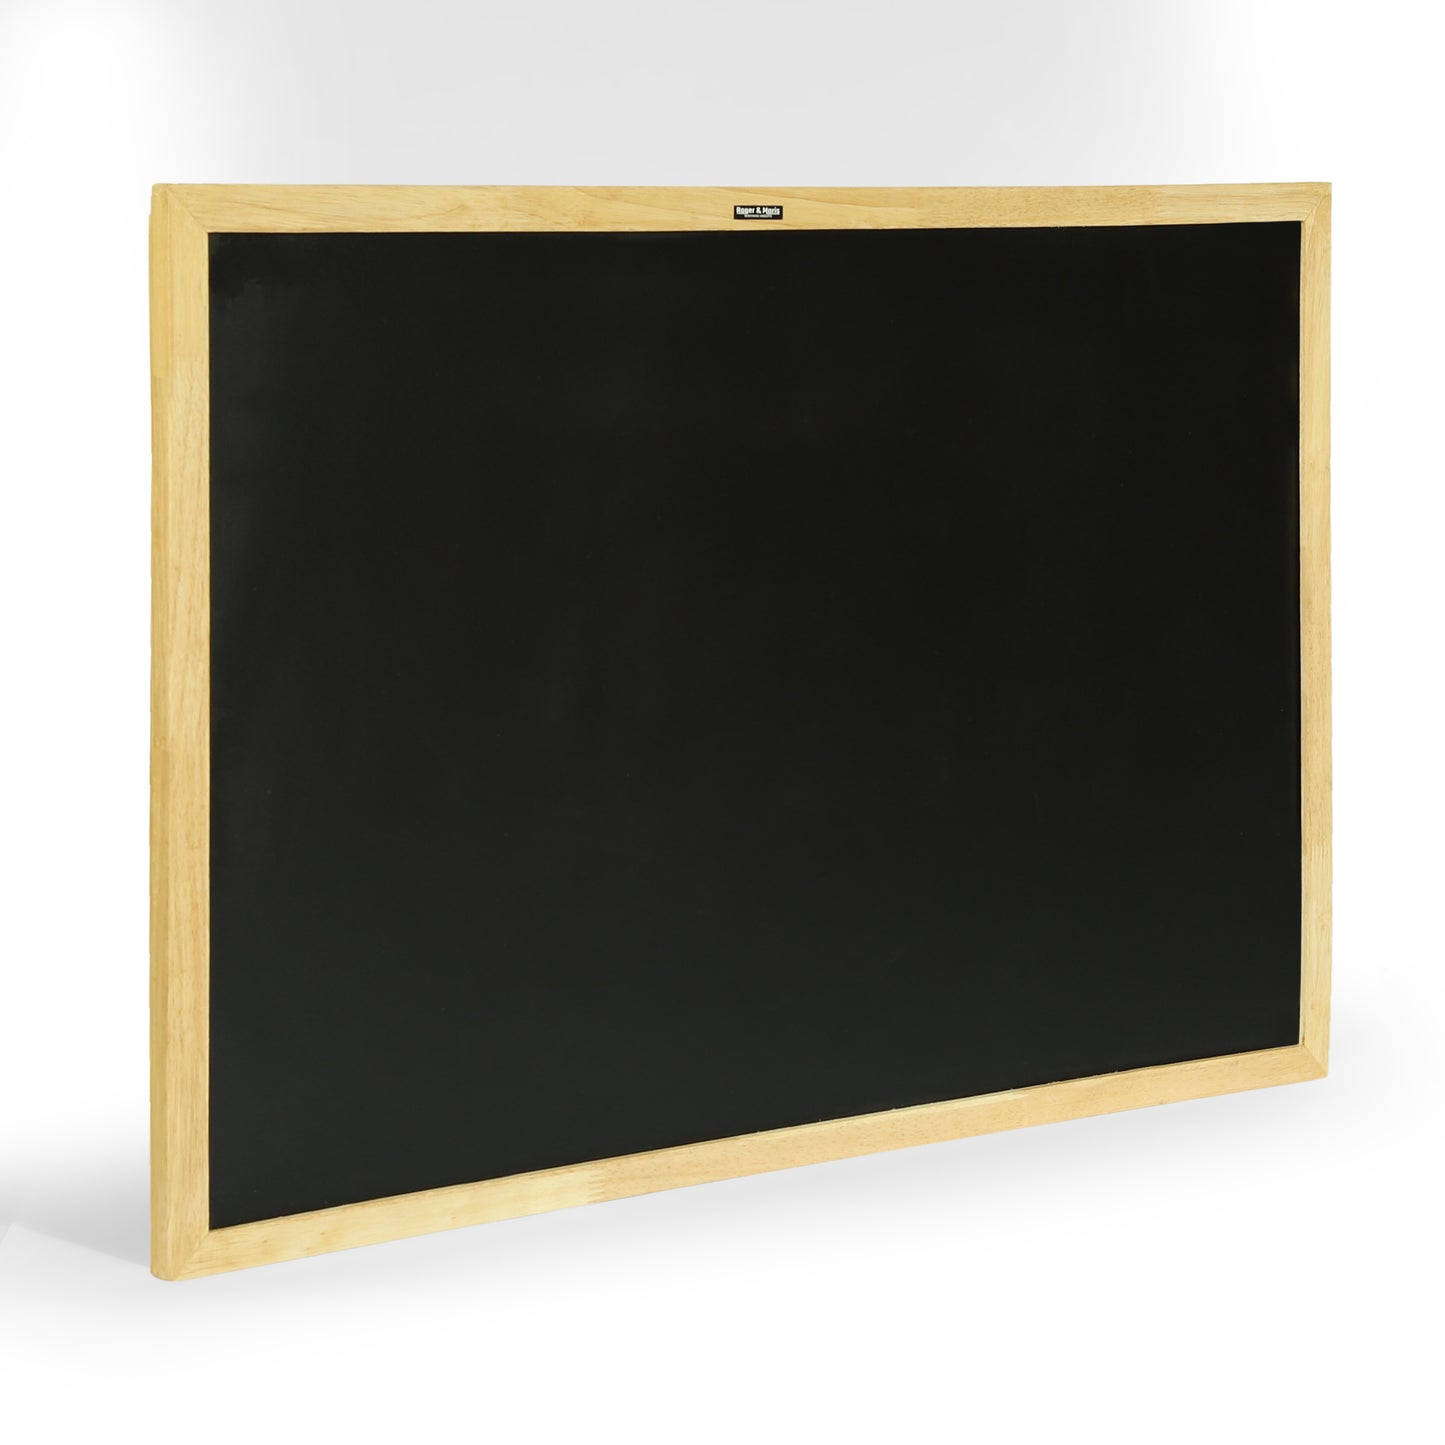 Roger & Moris Wooden (Rubber Wood) Framed Chalk Board - Non Magnetic, Lightweight for Home, Office and School (Black, Size : 3 feet x 3 feet)